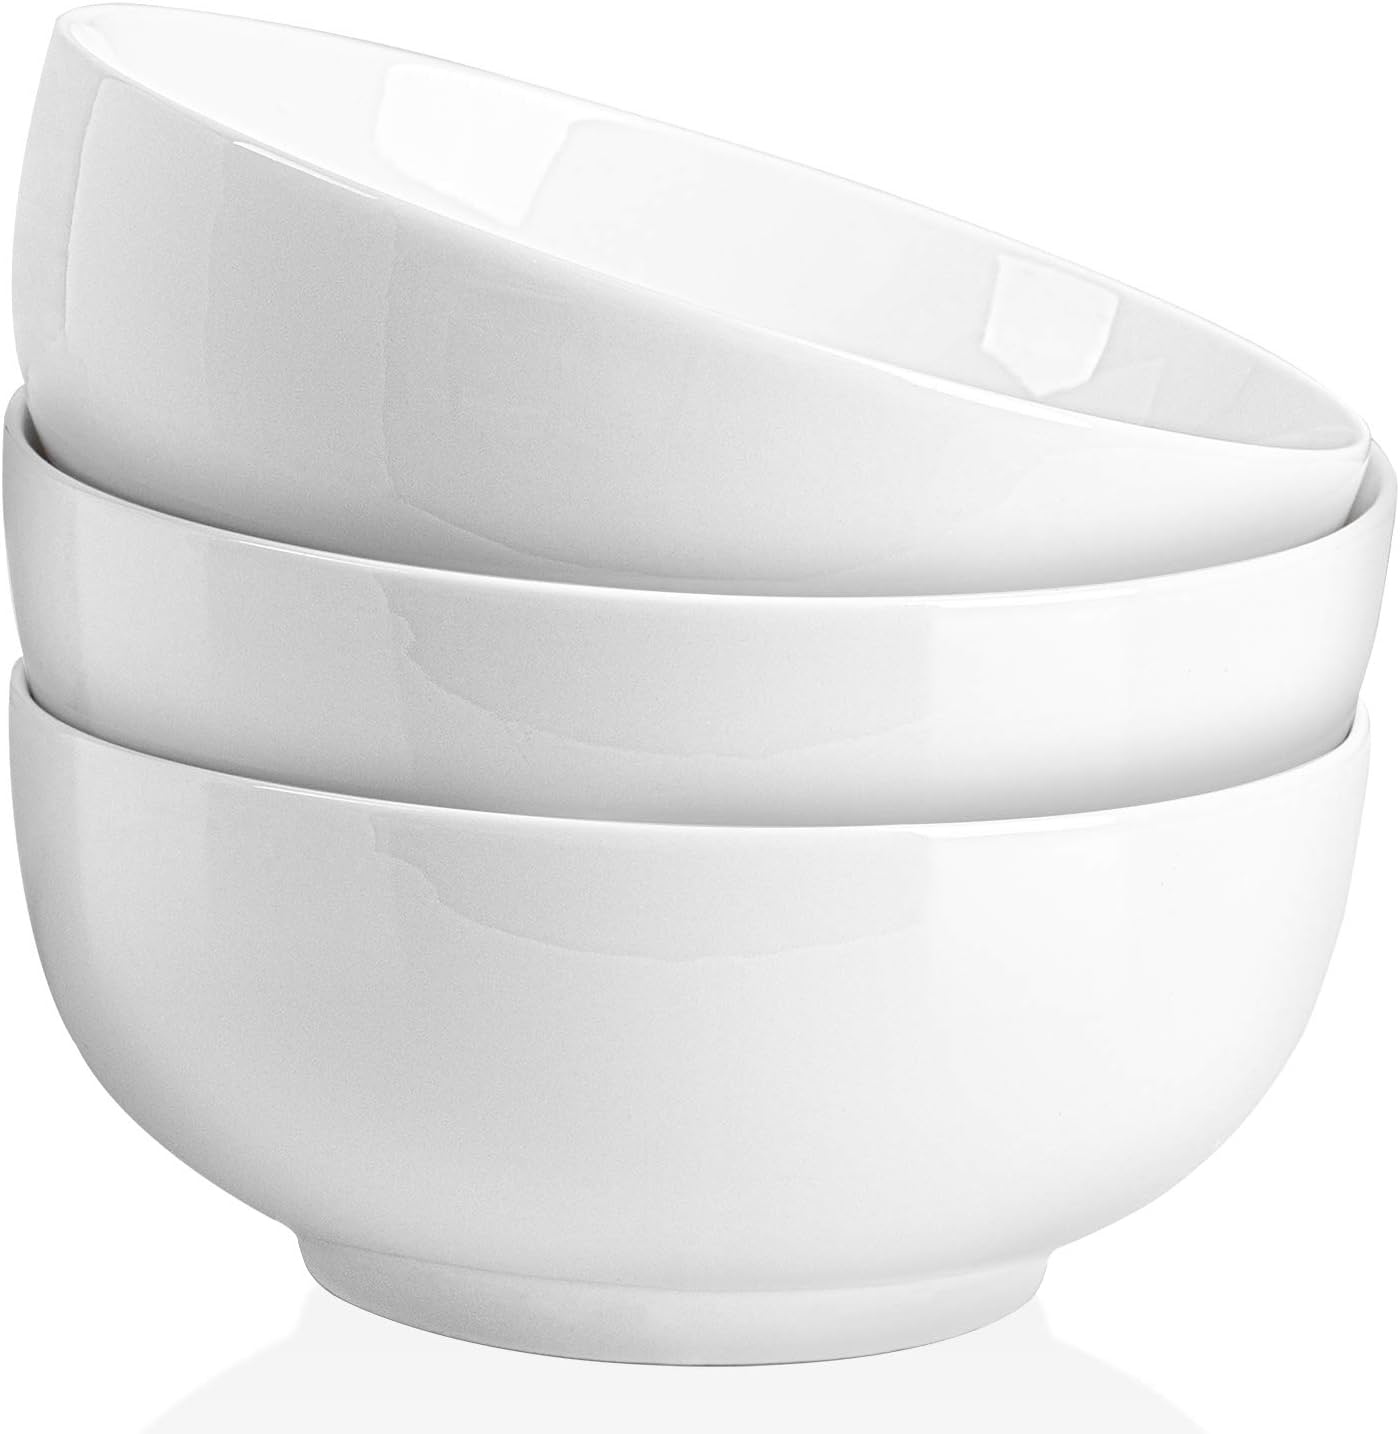 Delling 3Pack Dessert Bowls Small Cereal Bowls Set, 4.4" White Ceramic Soup Bowl, Small Serving Bowls for Rice, Ice Cream, Pasta, Oatmeal, Snacks, Side Dishes,Microwave and Dishwasher Safe